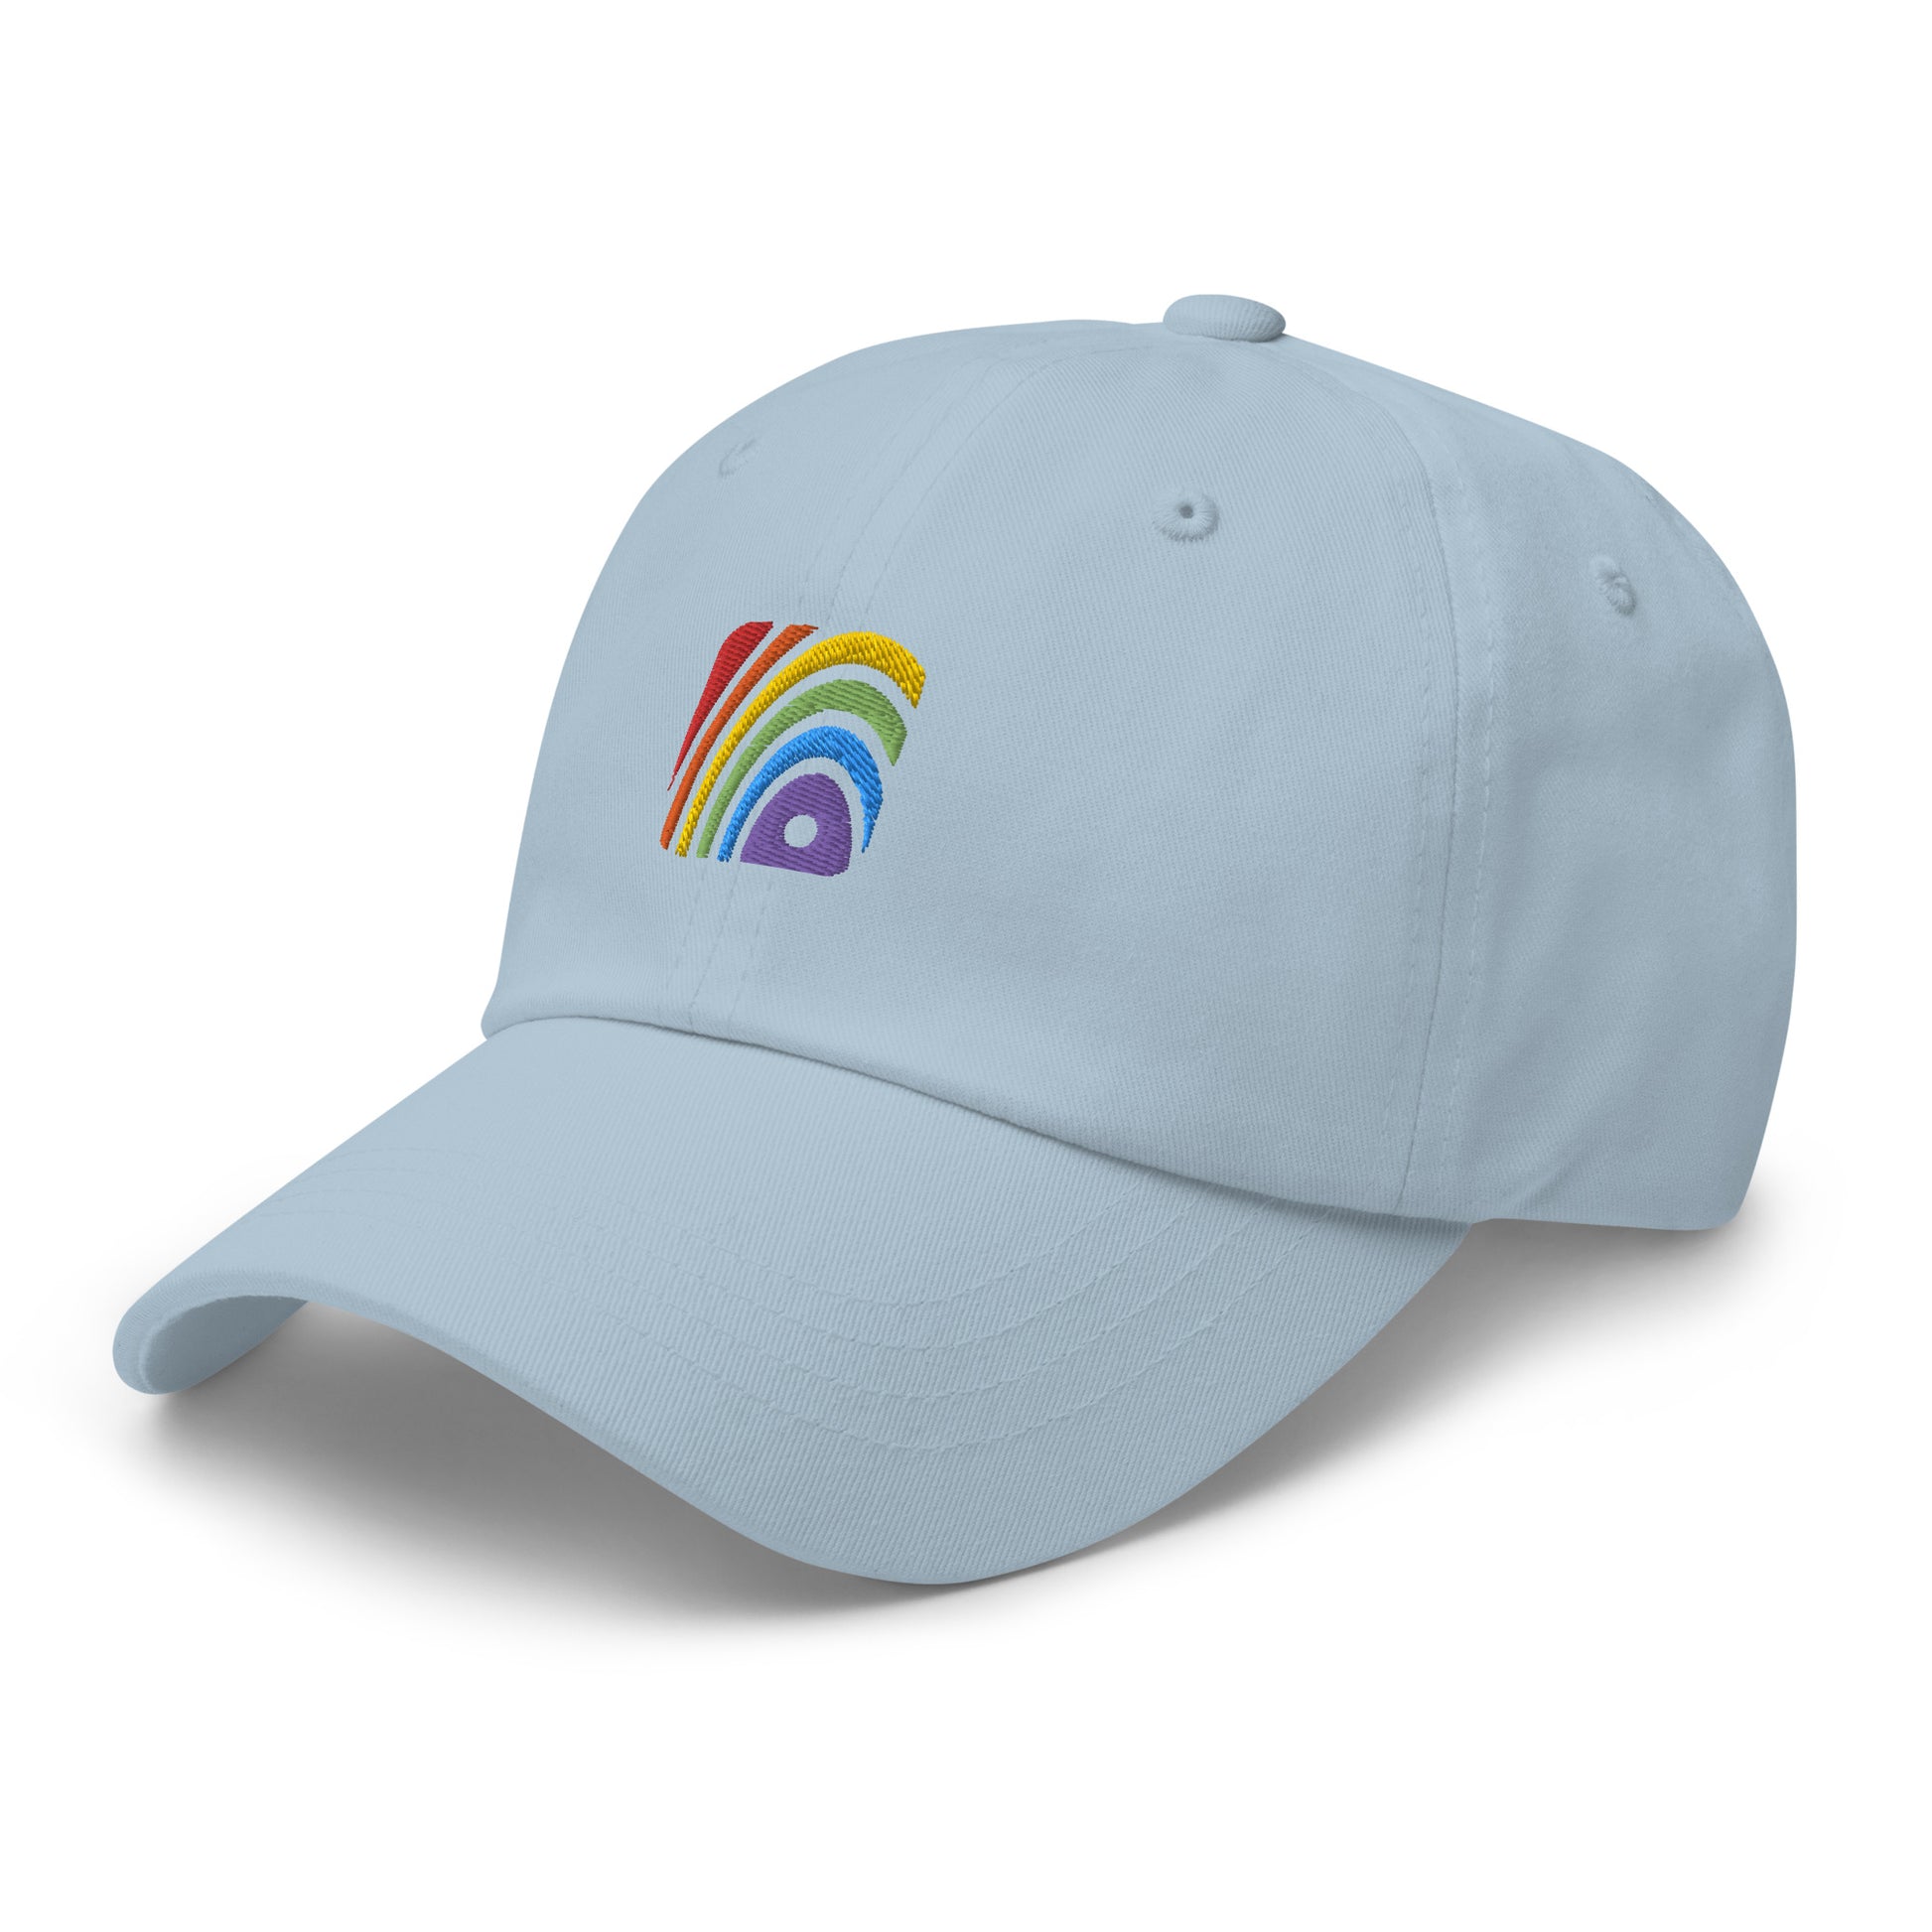 Light Blue baseball hat featuring rainbow design embroidery with a low profile, adjustable strap.